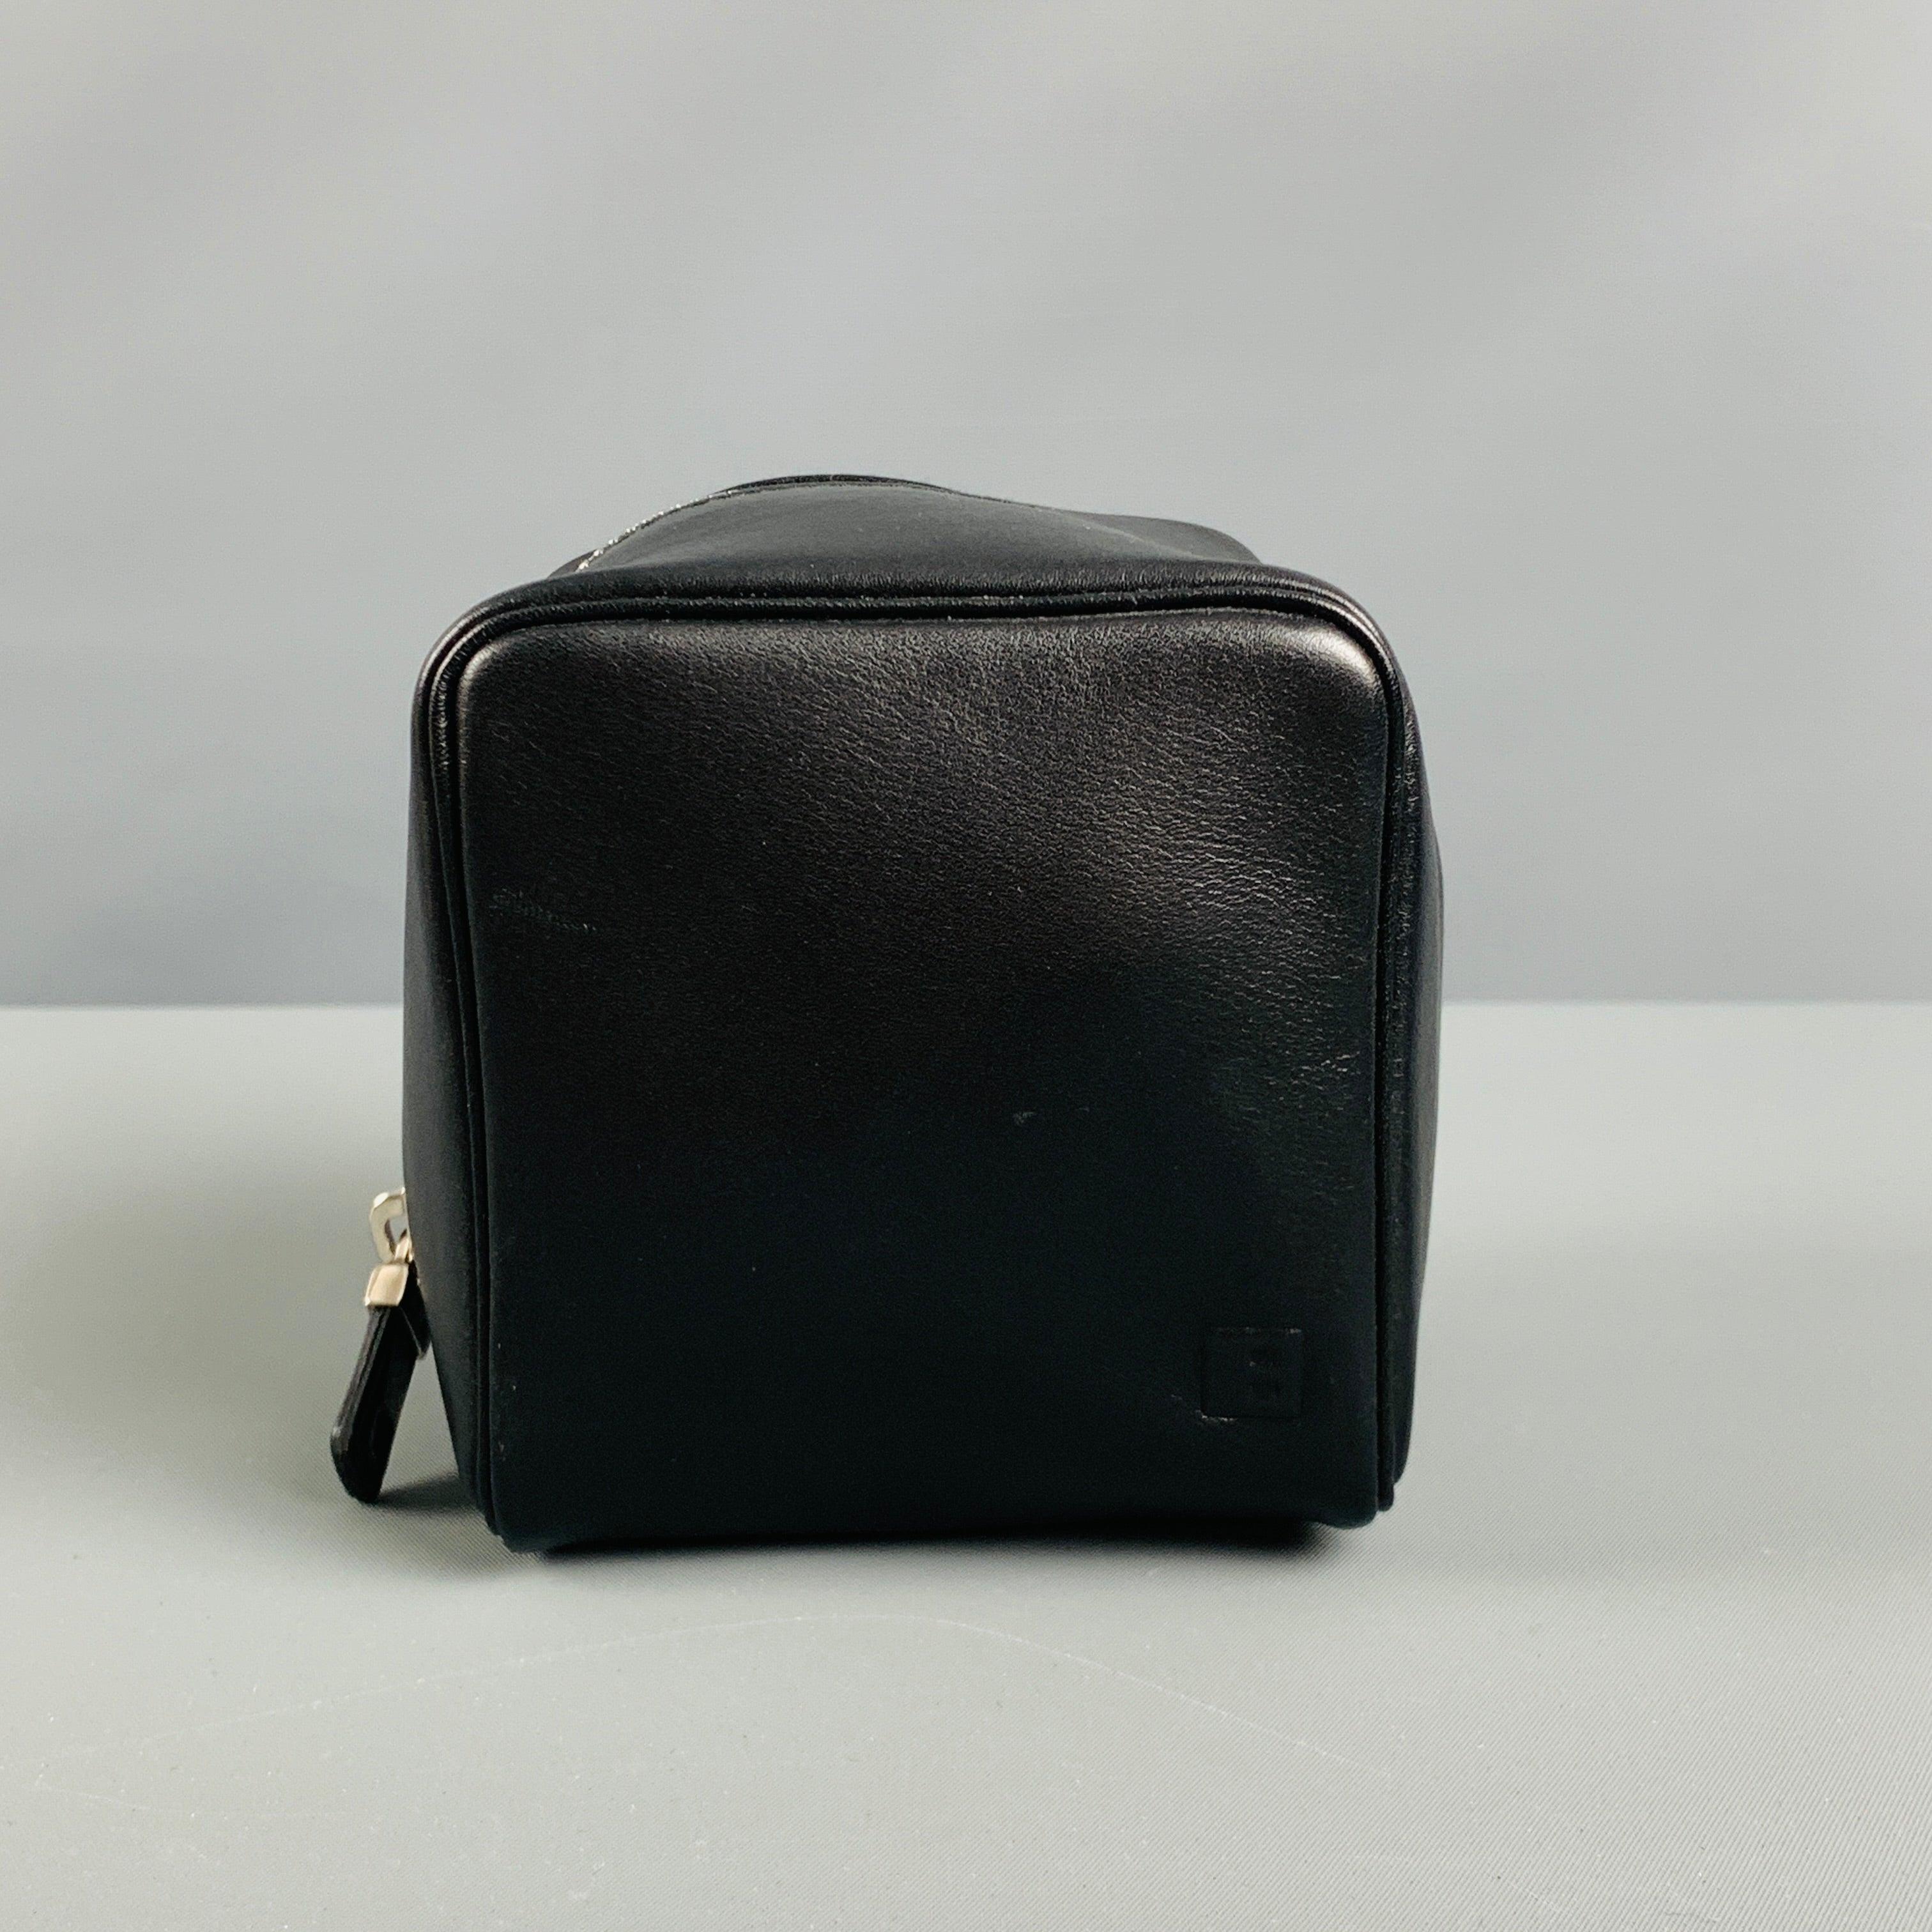 BALLY Black Leather Toiletry Handbag In Excellent Condition For Sale In San Francisco, CA